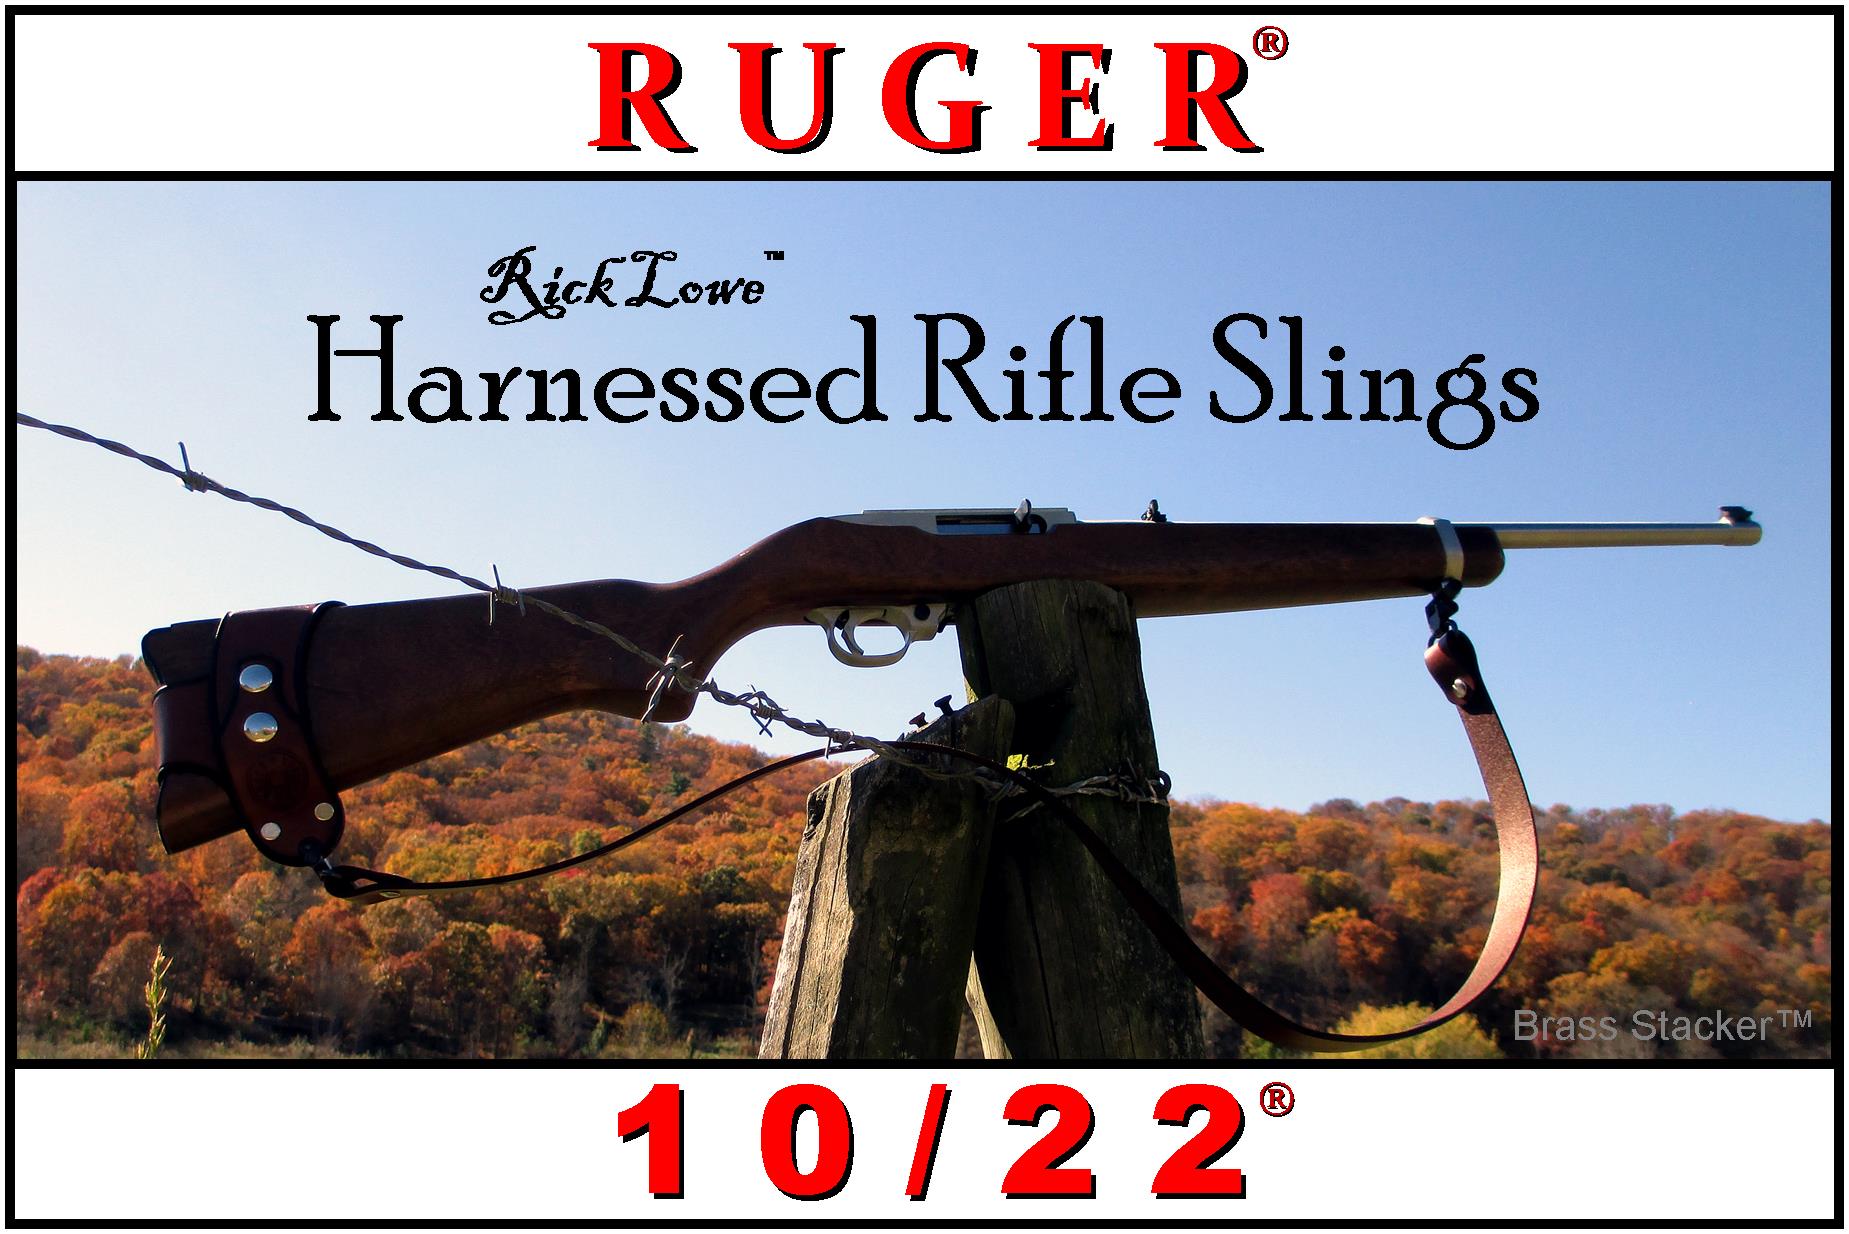 Brass Stacker™ RLO Custom Leather Ruger No Drill Harnessed Rifle Slings